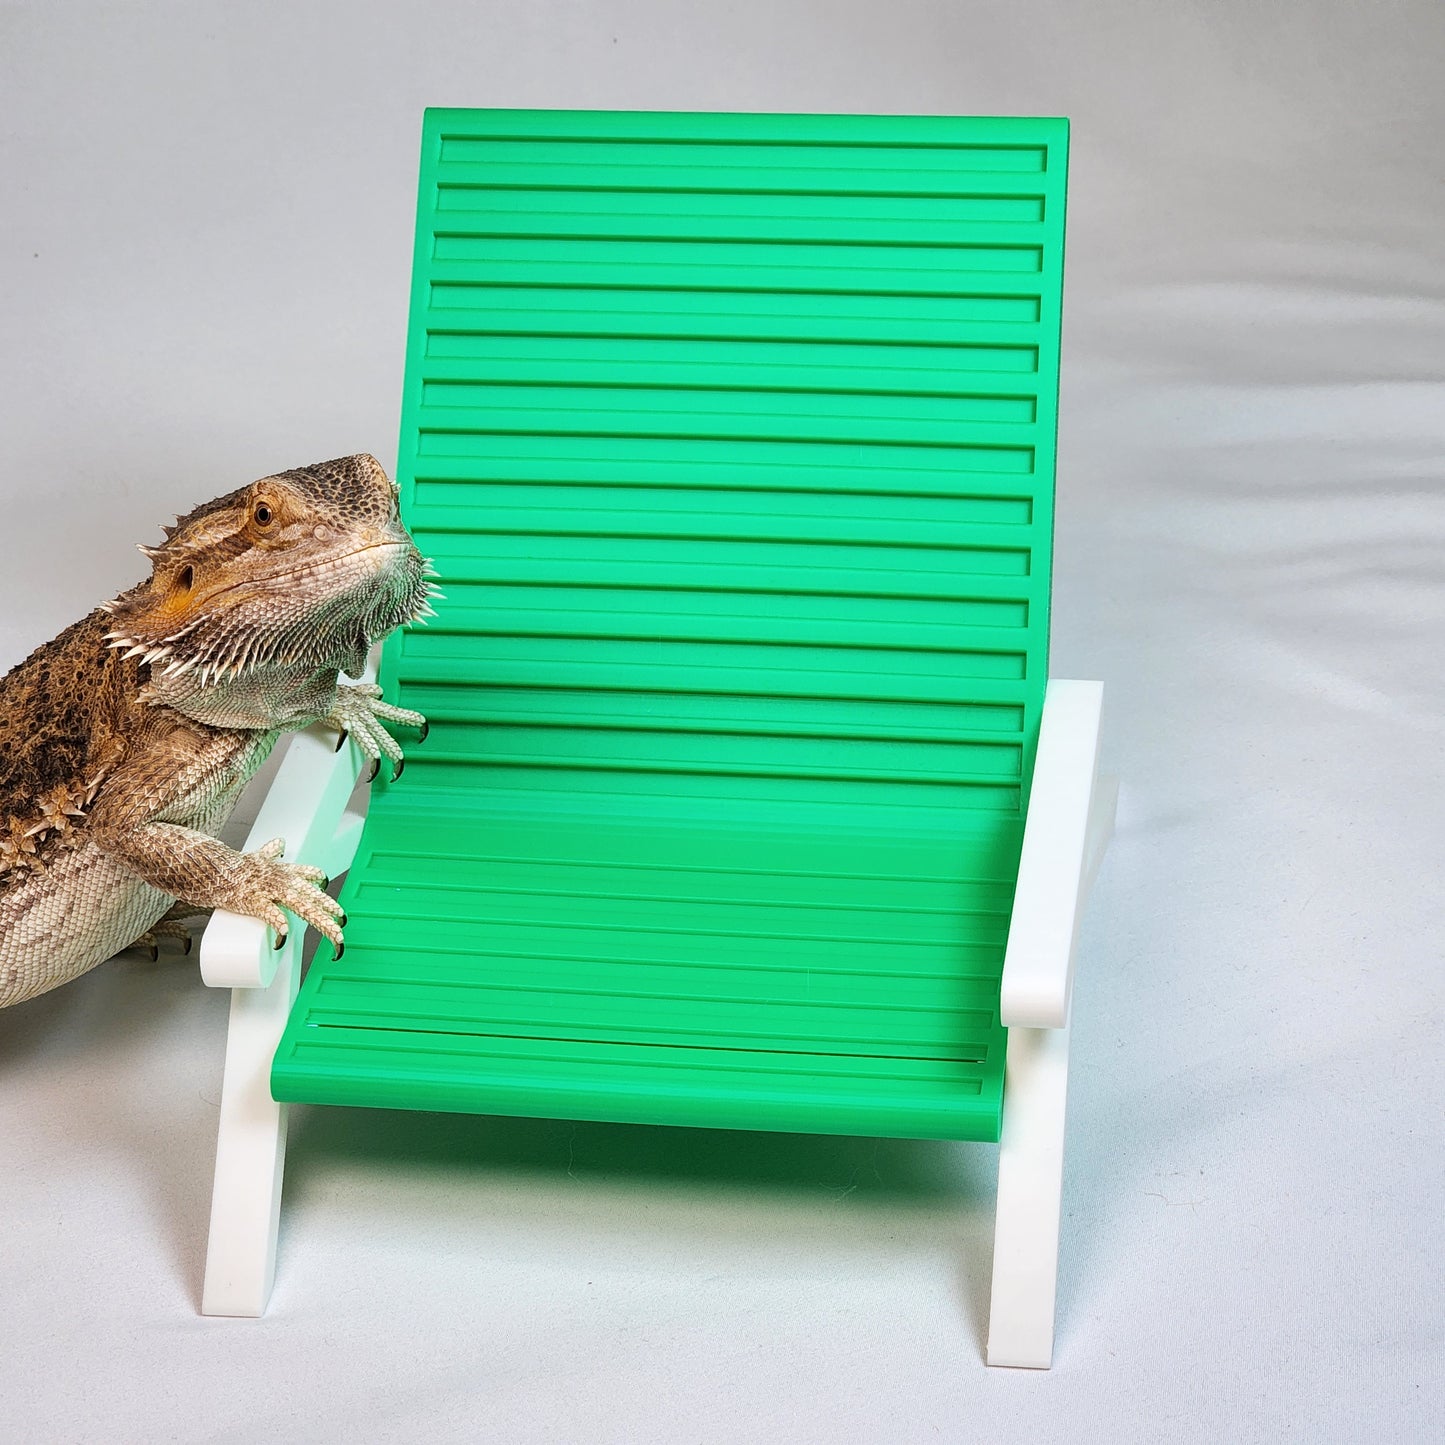 Reptile Beach Lounging Chair | Bearded dragon and leopard gecko hammock lounger and basking spot, Bearded dragon furniture decor